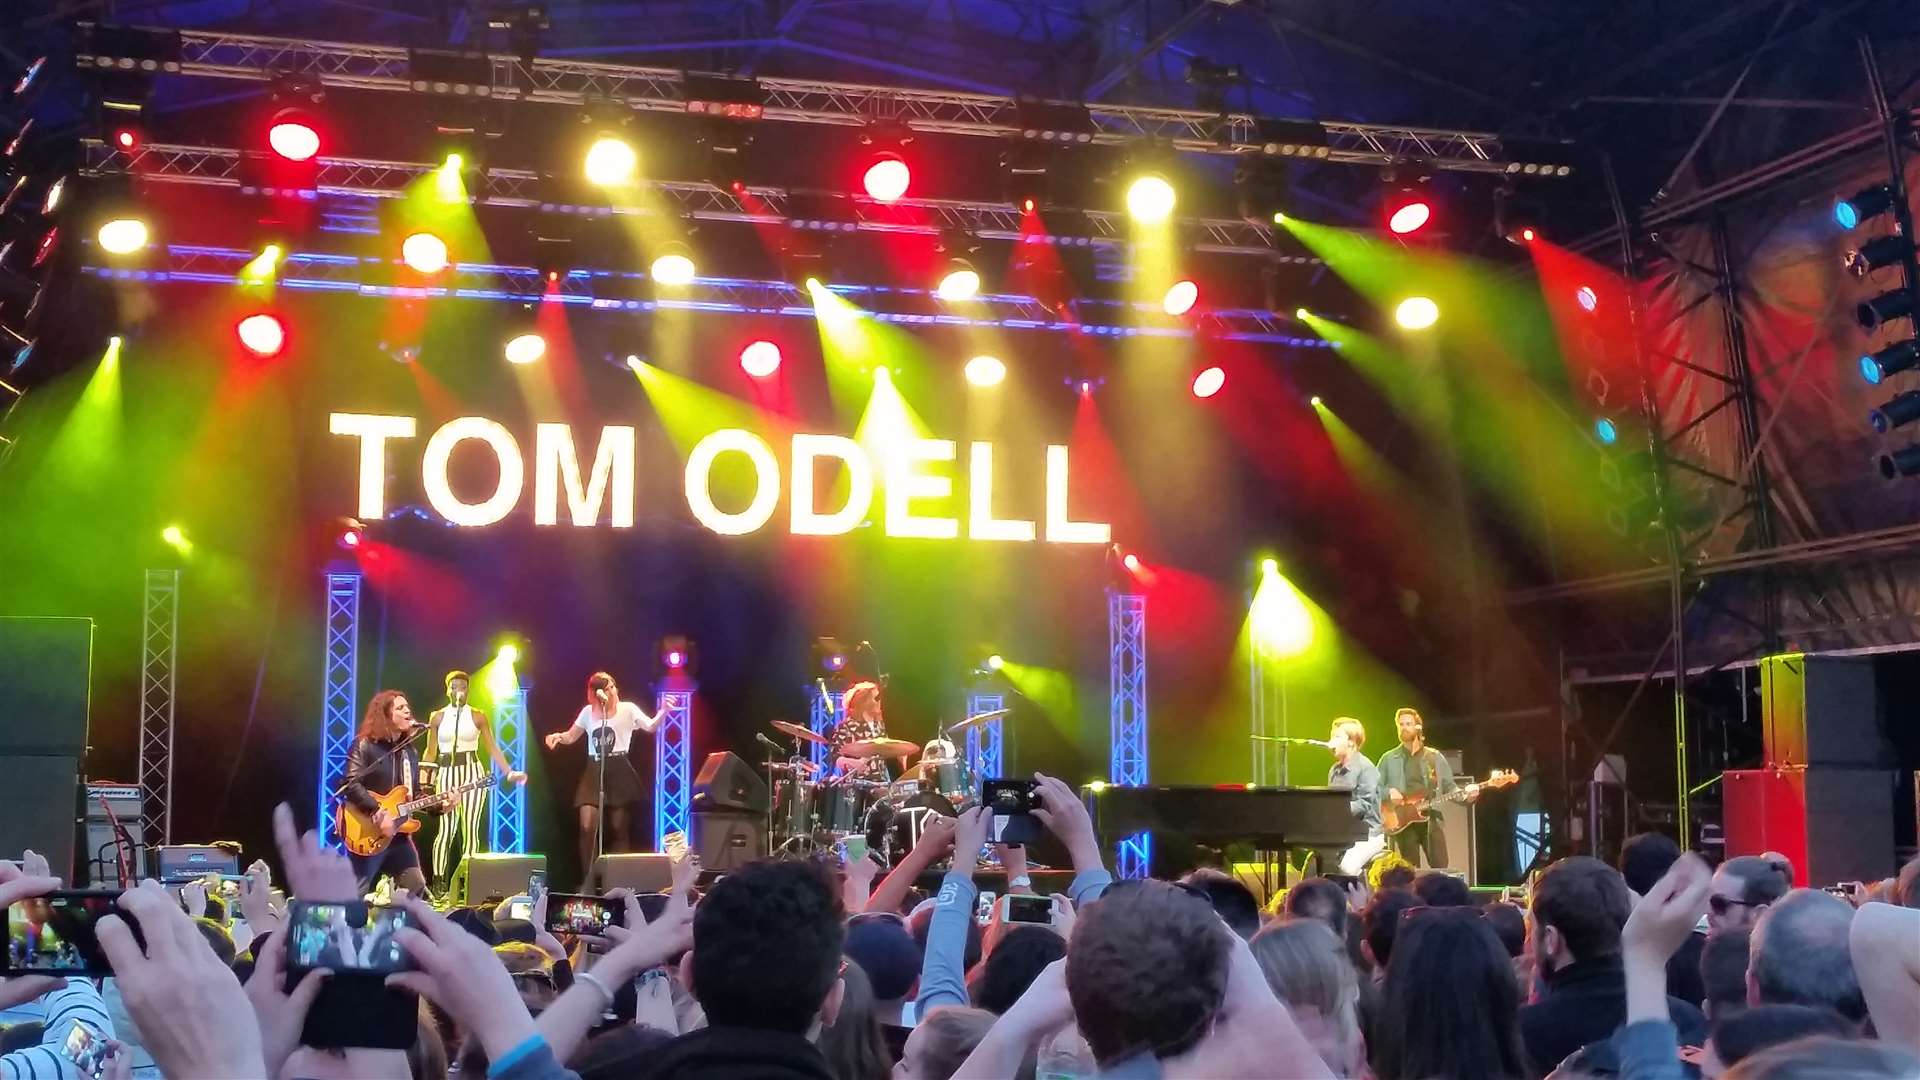 Tom Odell woke up the crowd at Bedgebury Pinetum